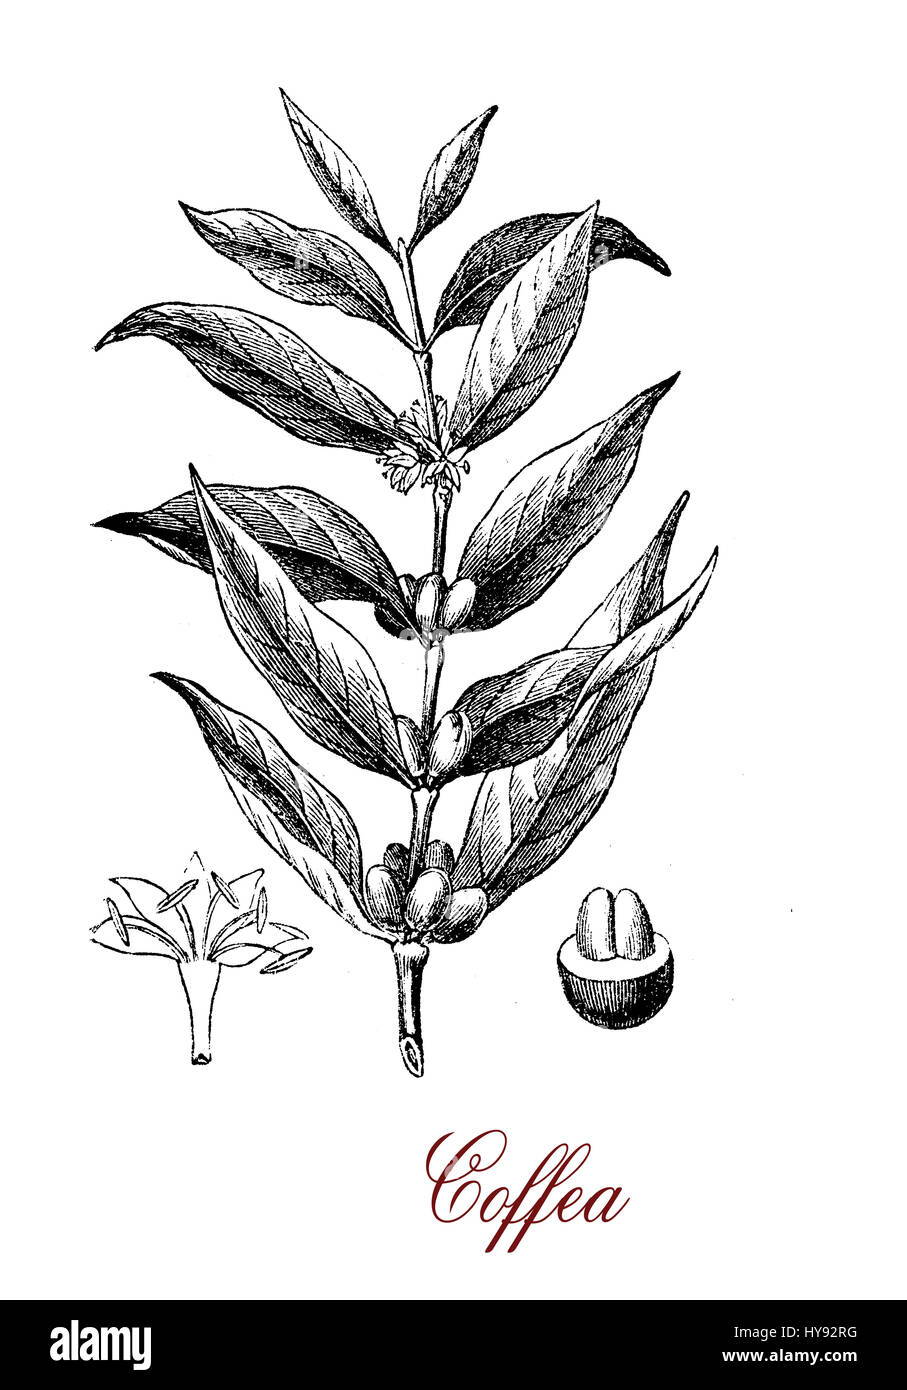 Vintage engraving of Coffea (coffee plant)  botanical morphology:  leaves, flowers and berries containing 2 coffee beans each. Stock Photo